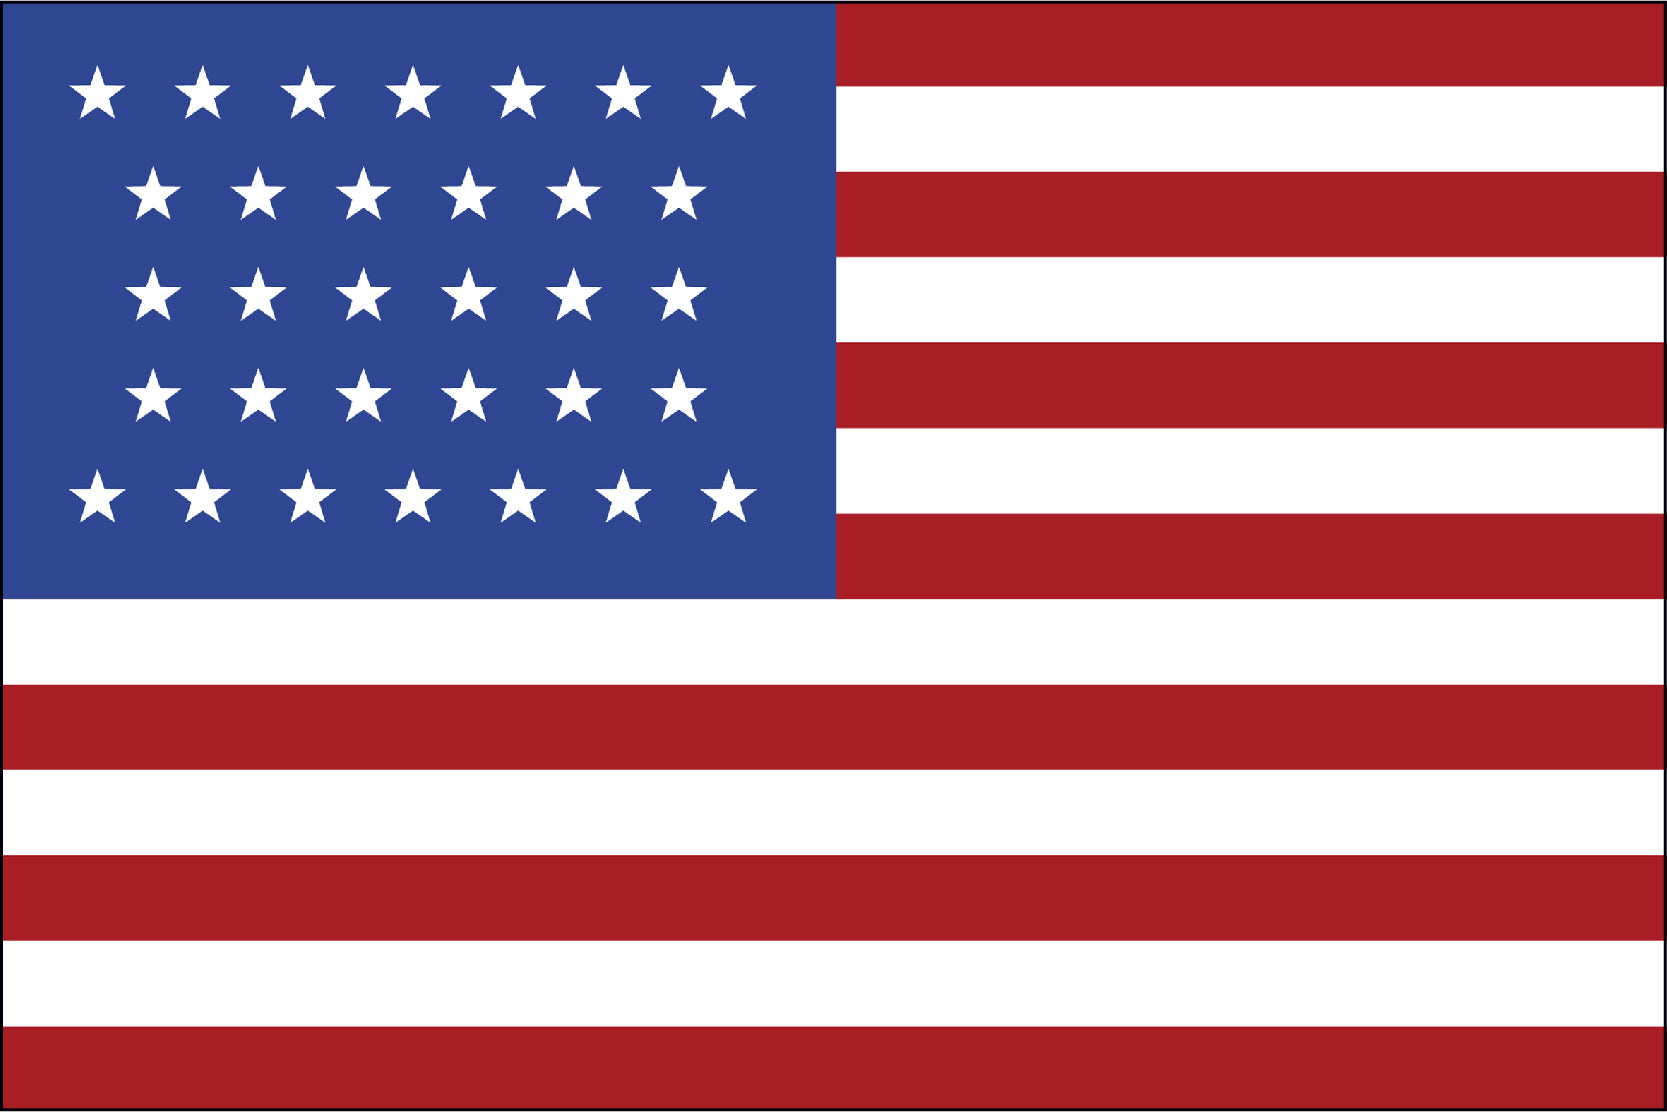 32 Star Old Glory Flag - LEAD TIMES ARE CURRENTLY RUNNING 6-8 WEEKS